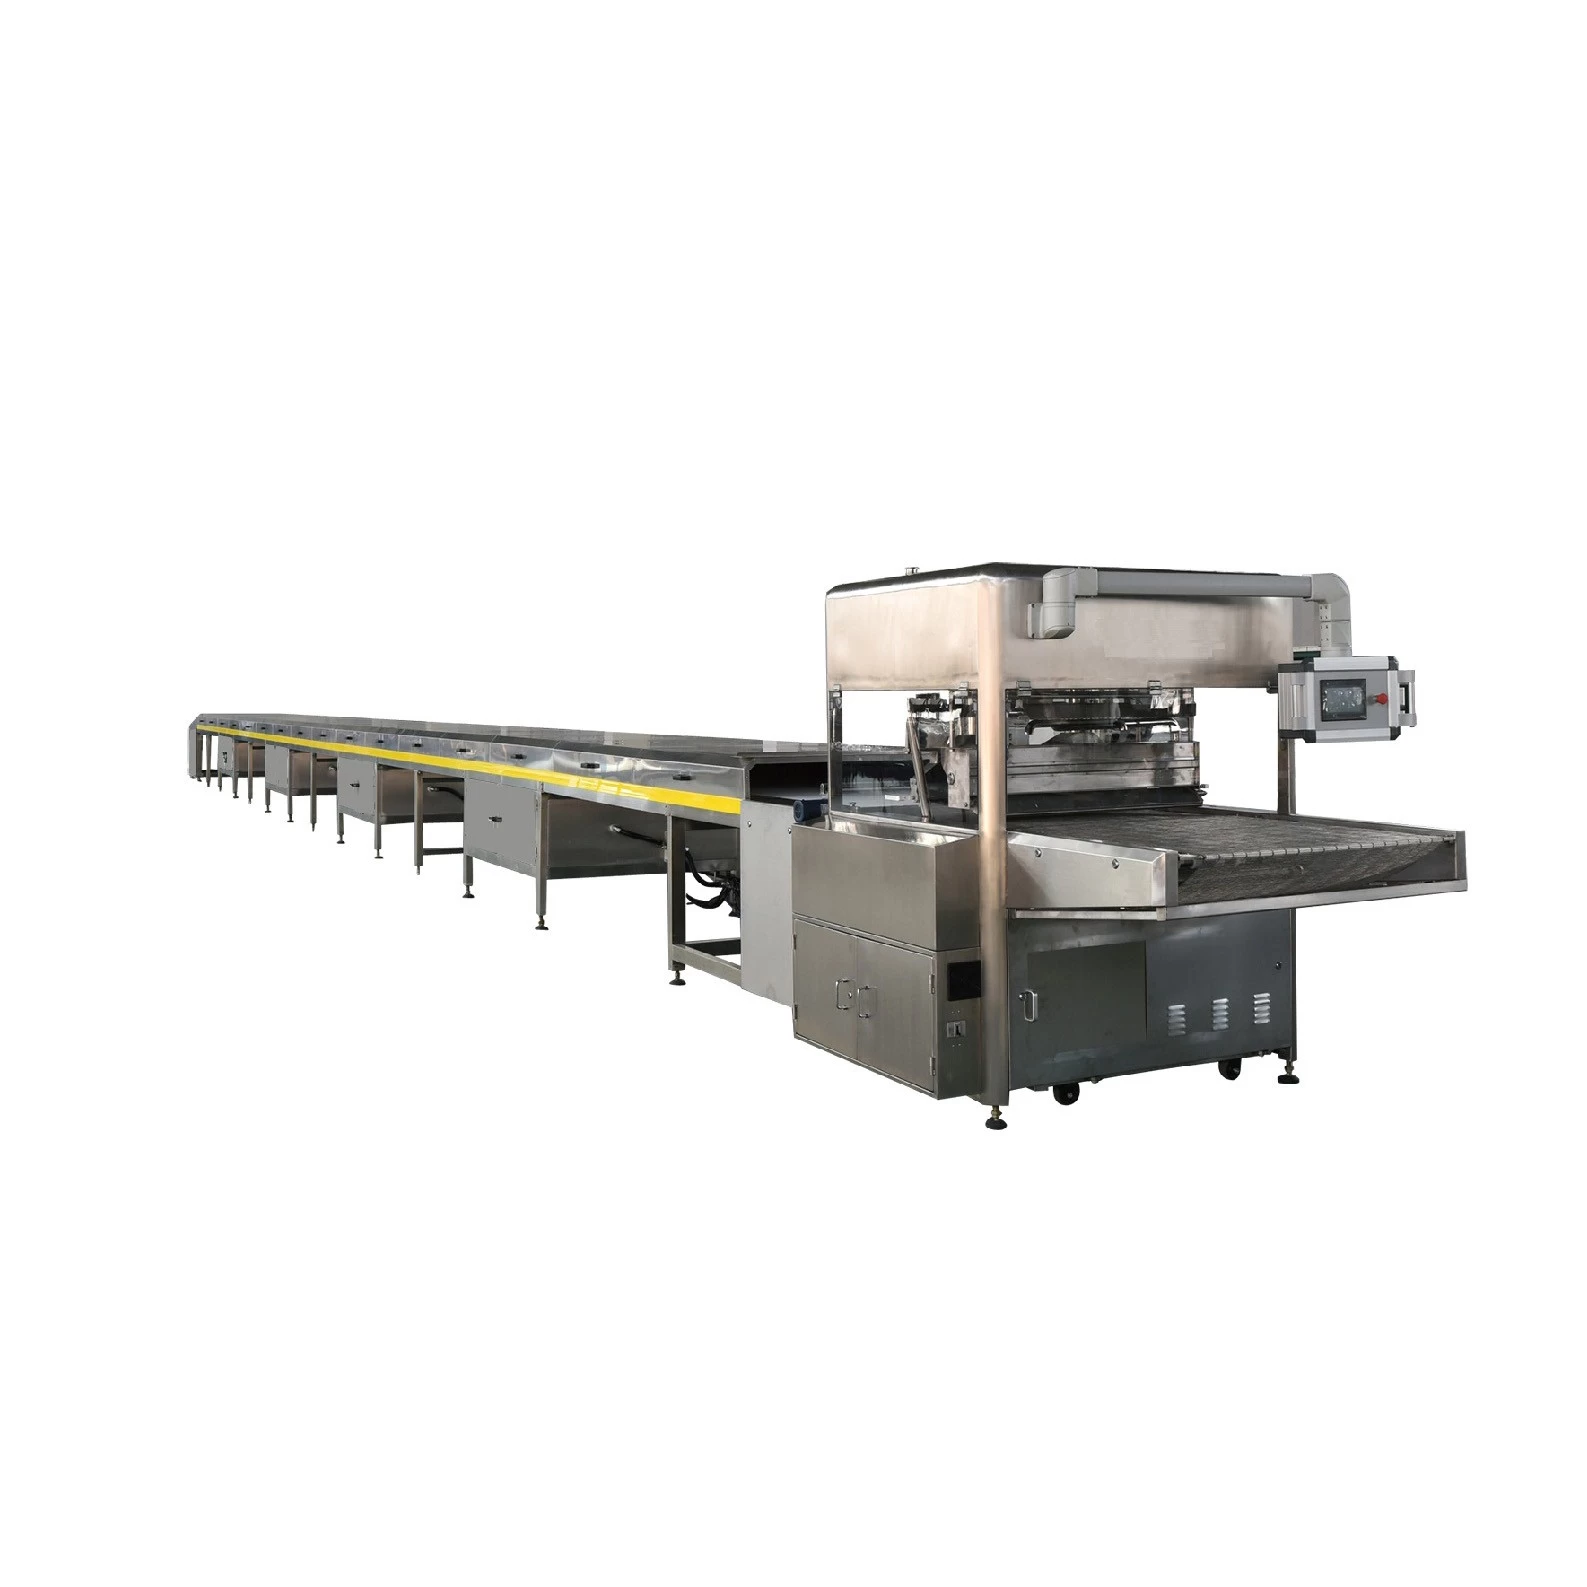 China mini chocolate enrobing coating machine small chocolate making line for bar wafers biscuit production Hersteller